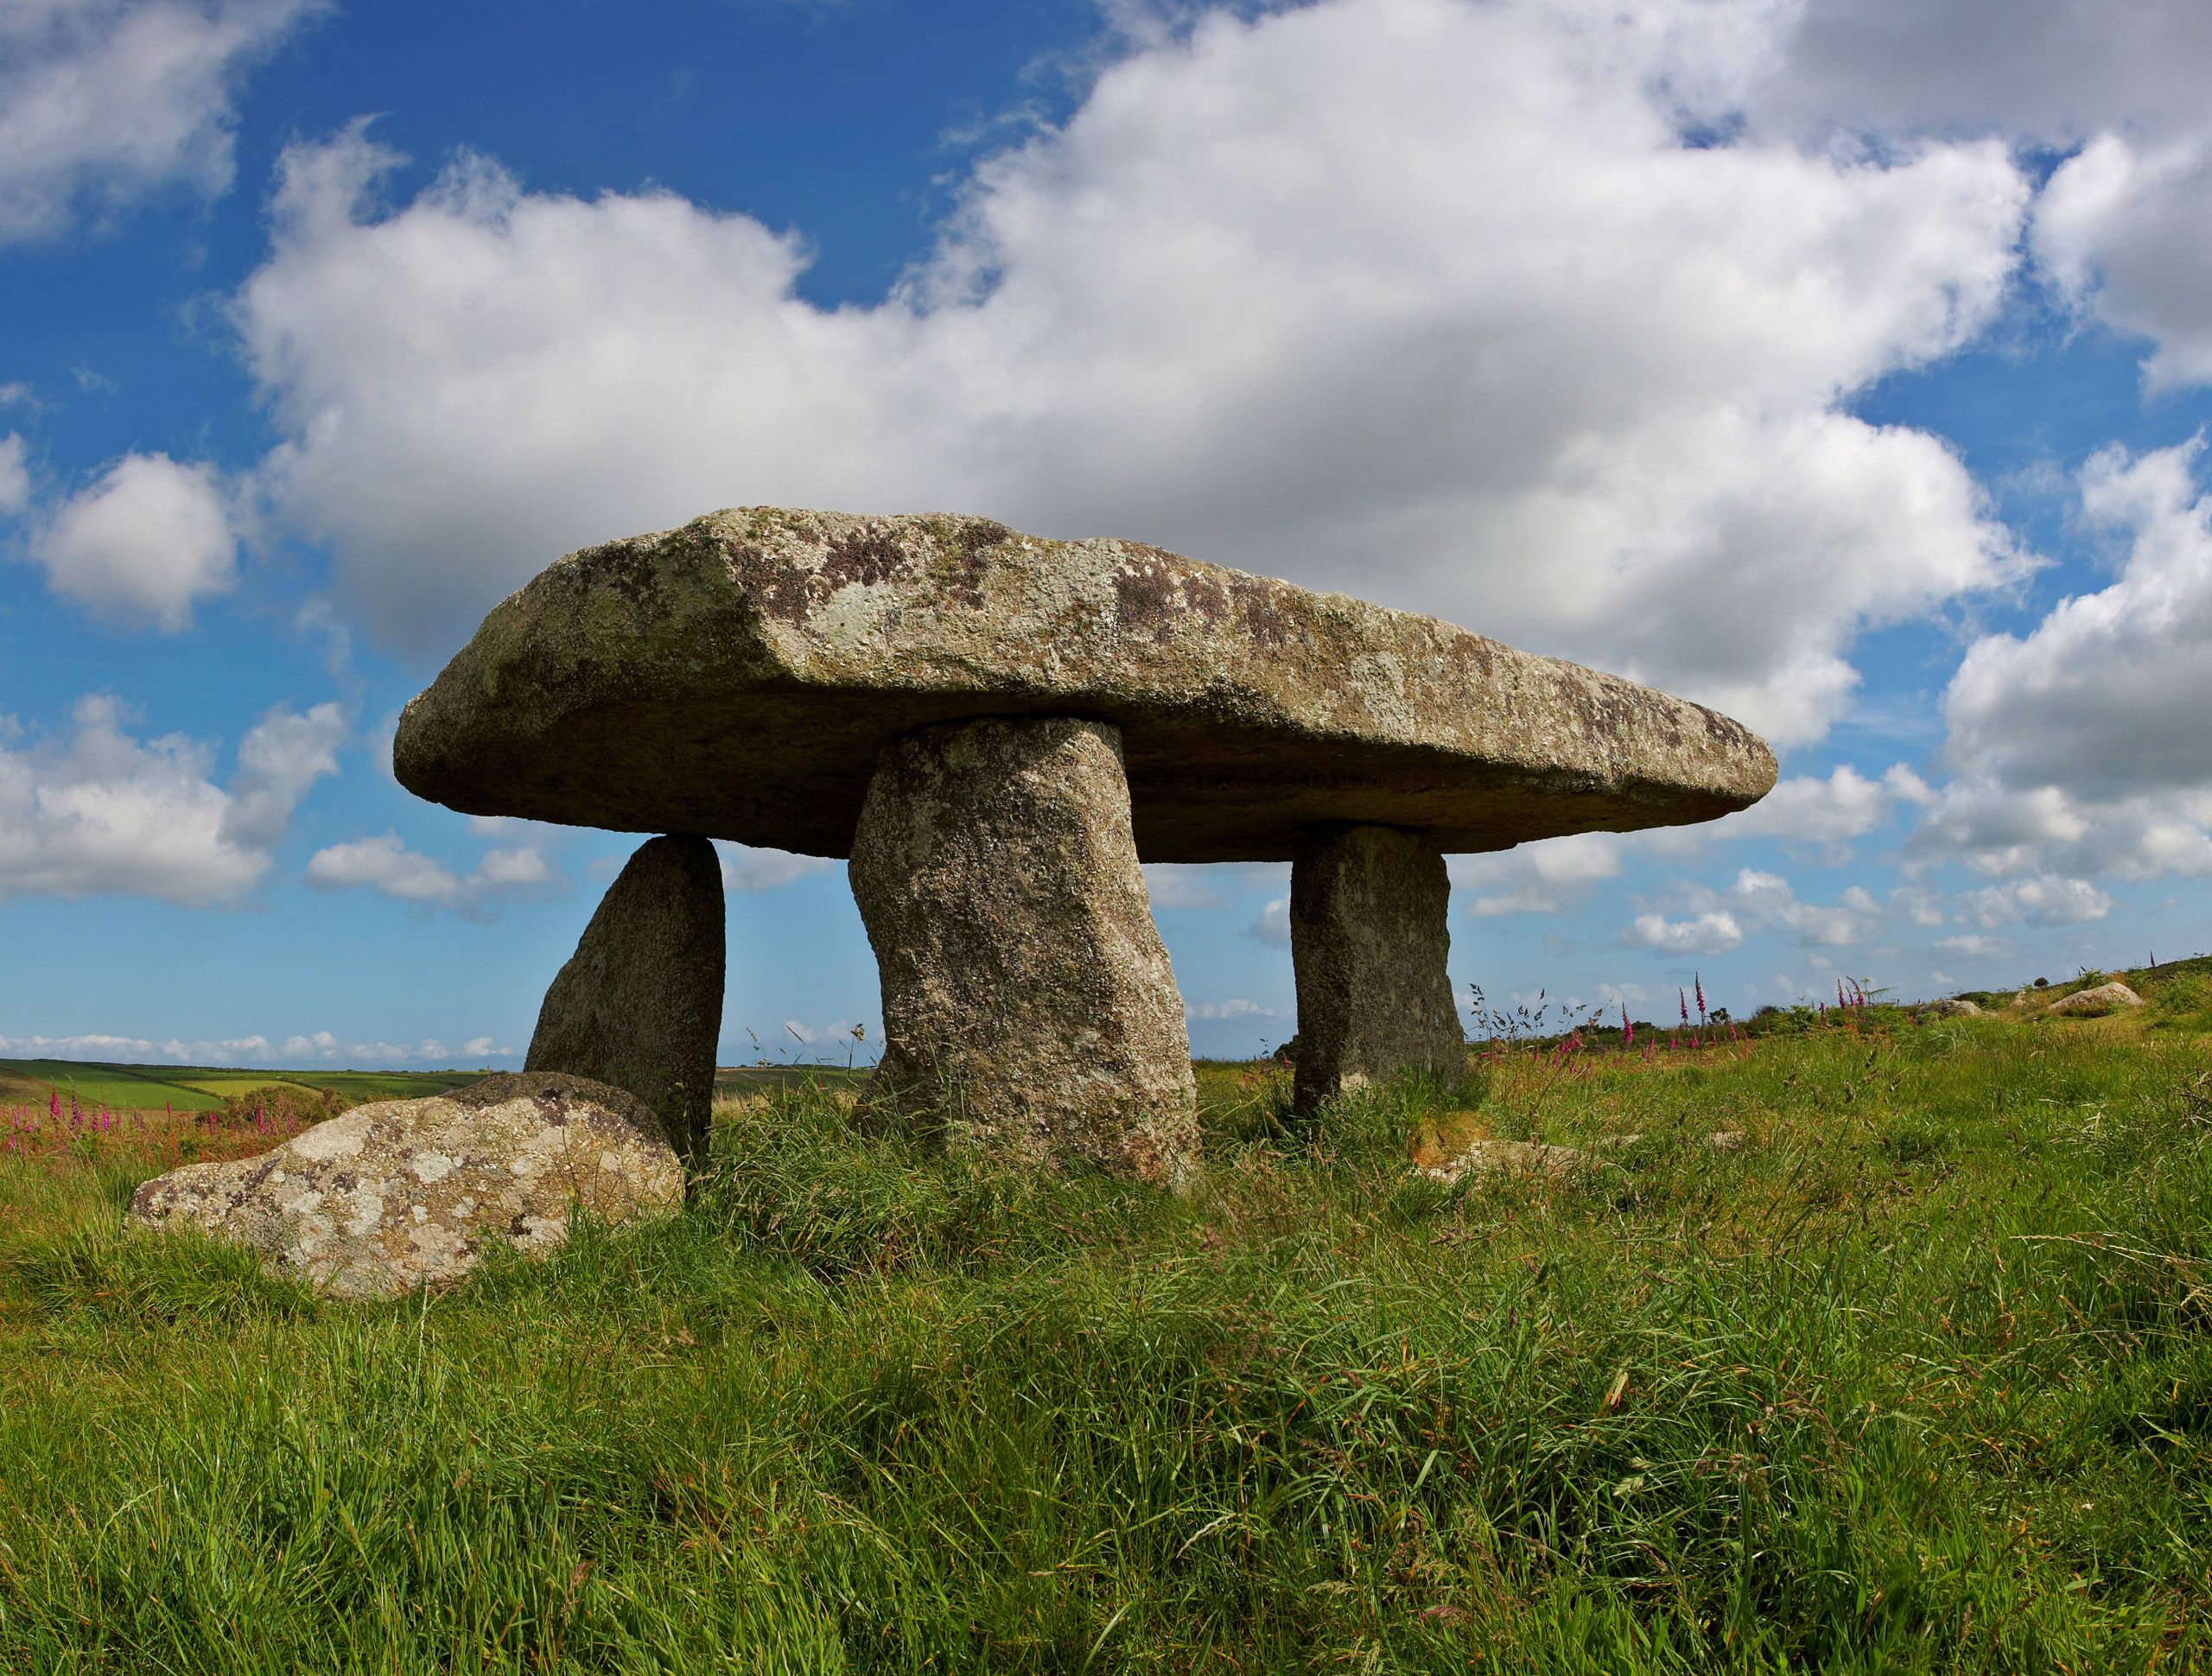 General 2560x1940 Lanyon Quoit dolmen prehistoric Cornwall England rocks clouds sky grass megaliths